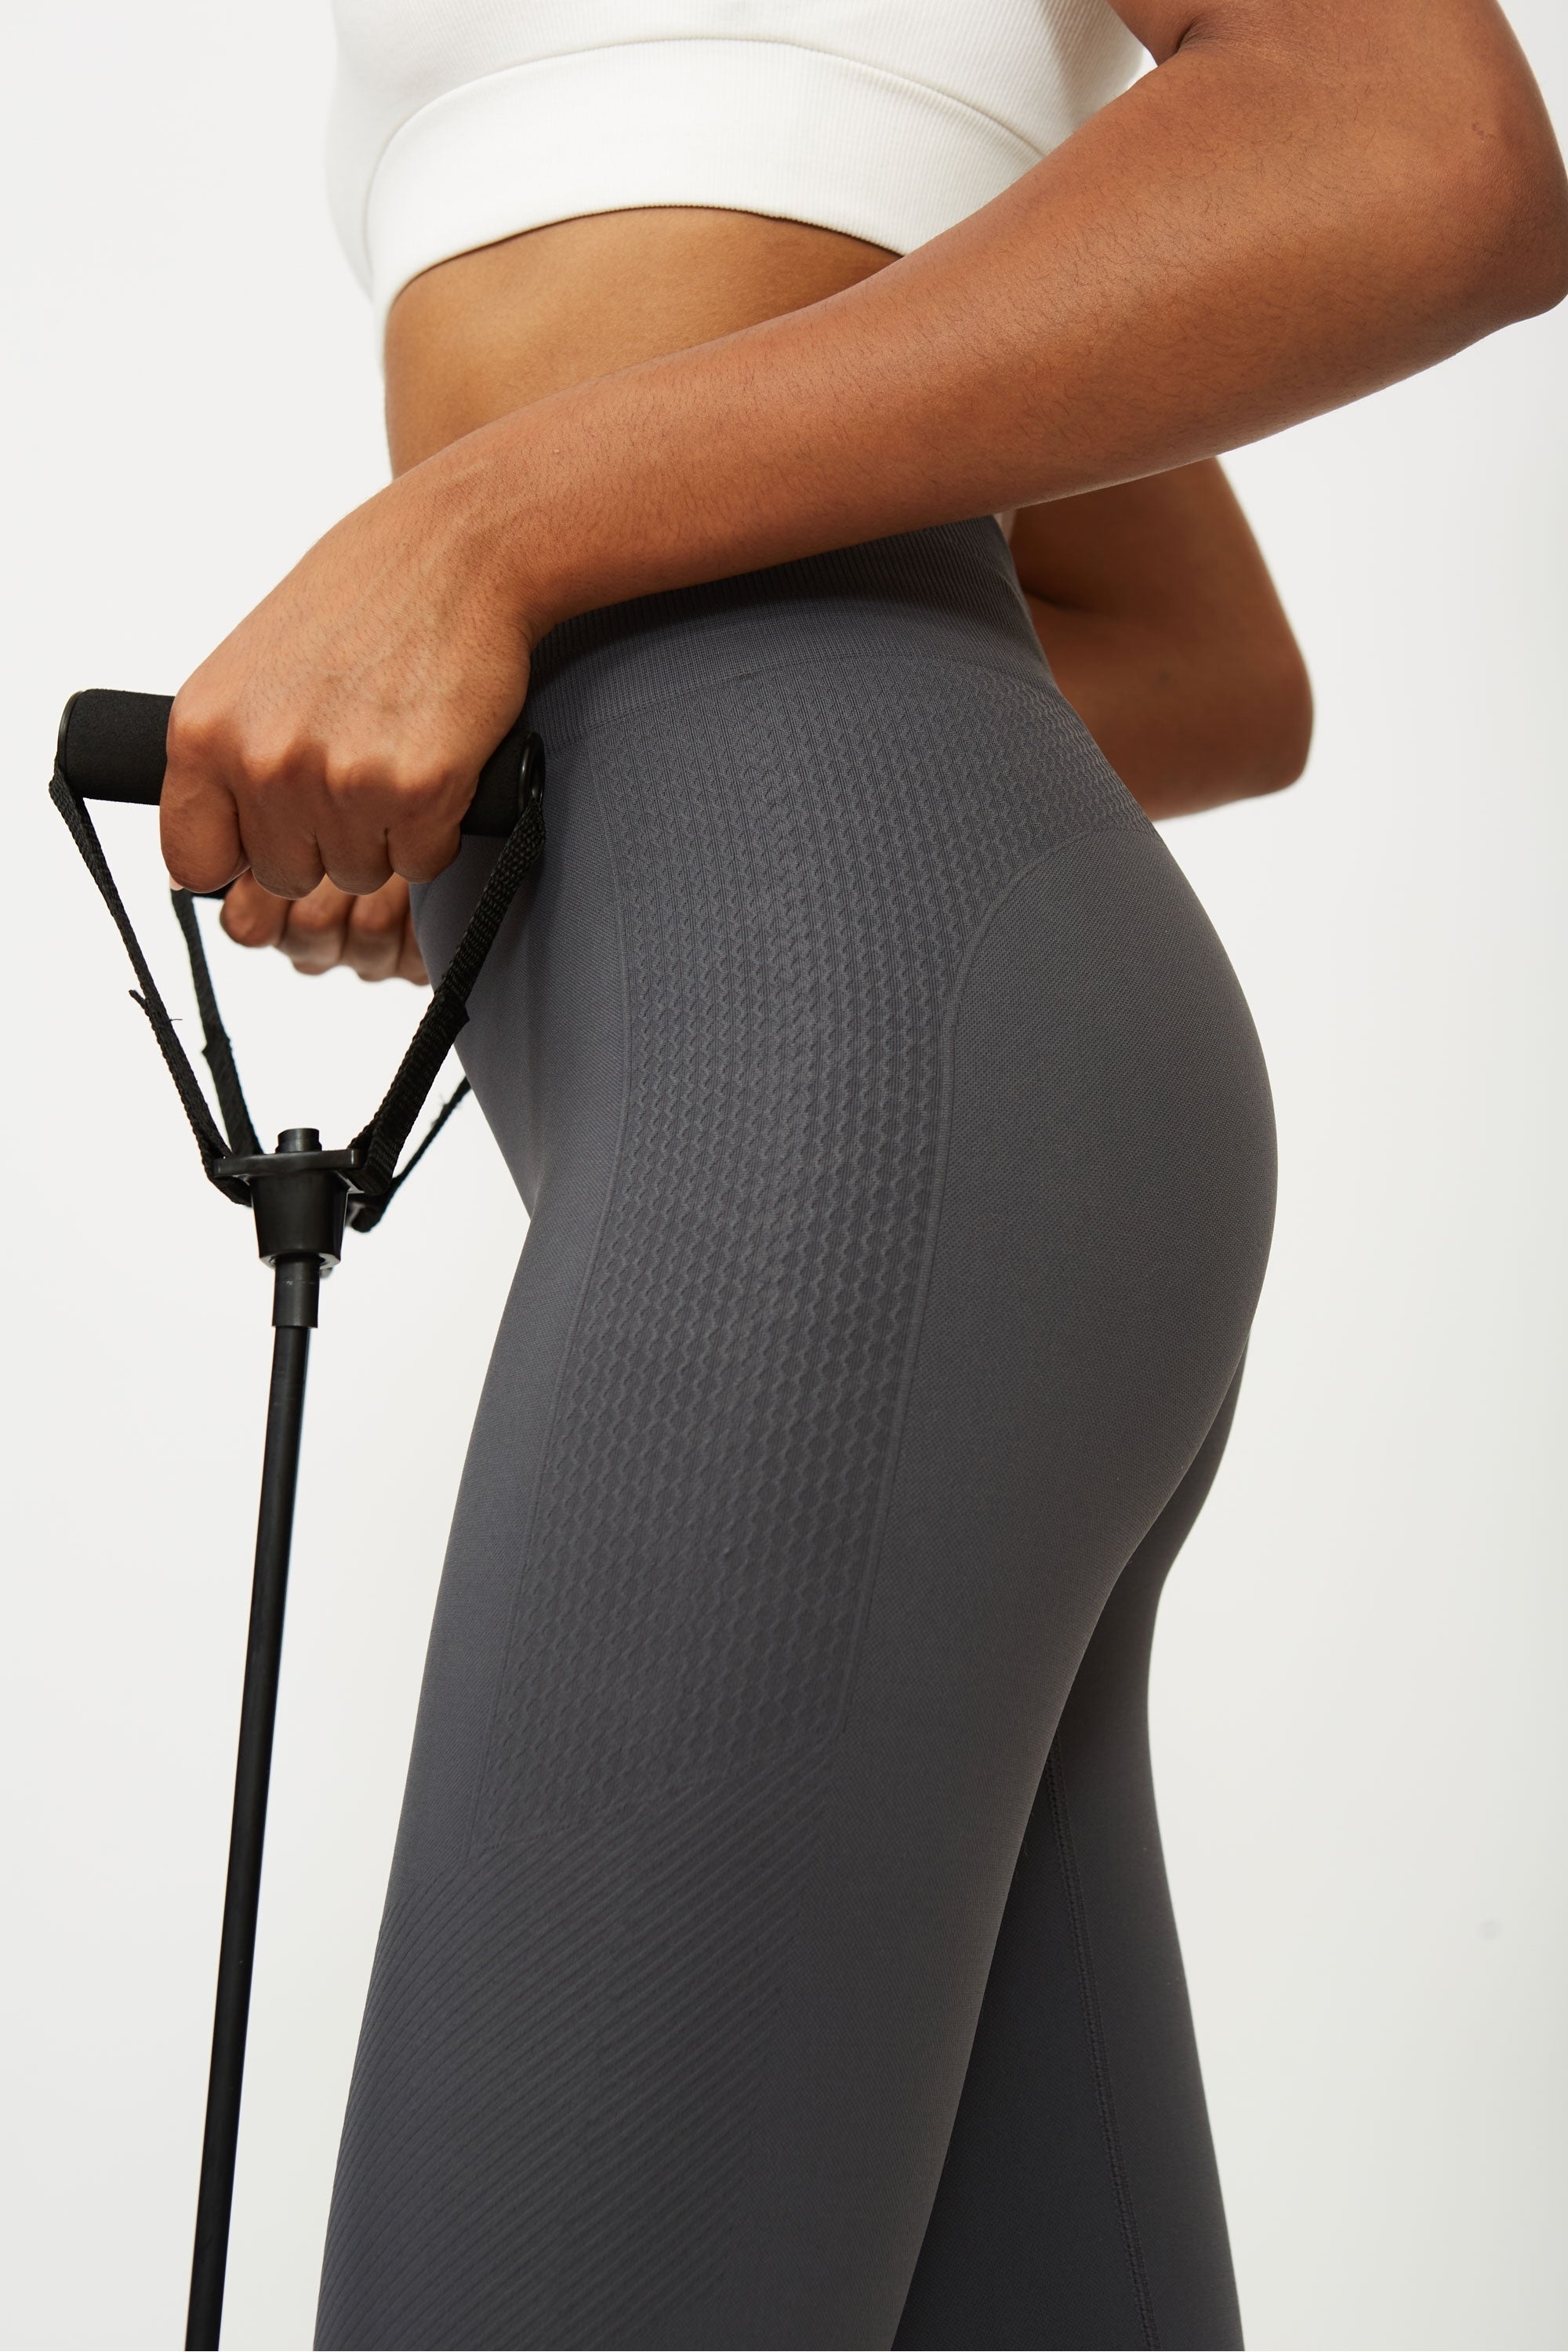 Model wearing grey leggings and white supportive sports bra for sustainable activewear brand, Jilla.